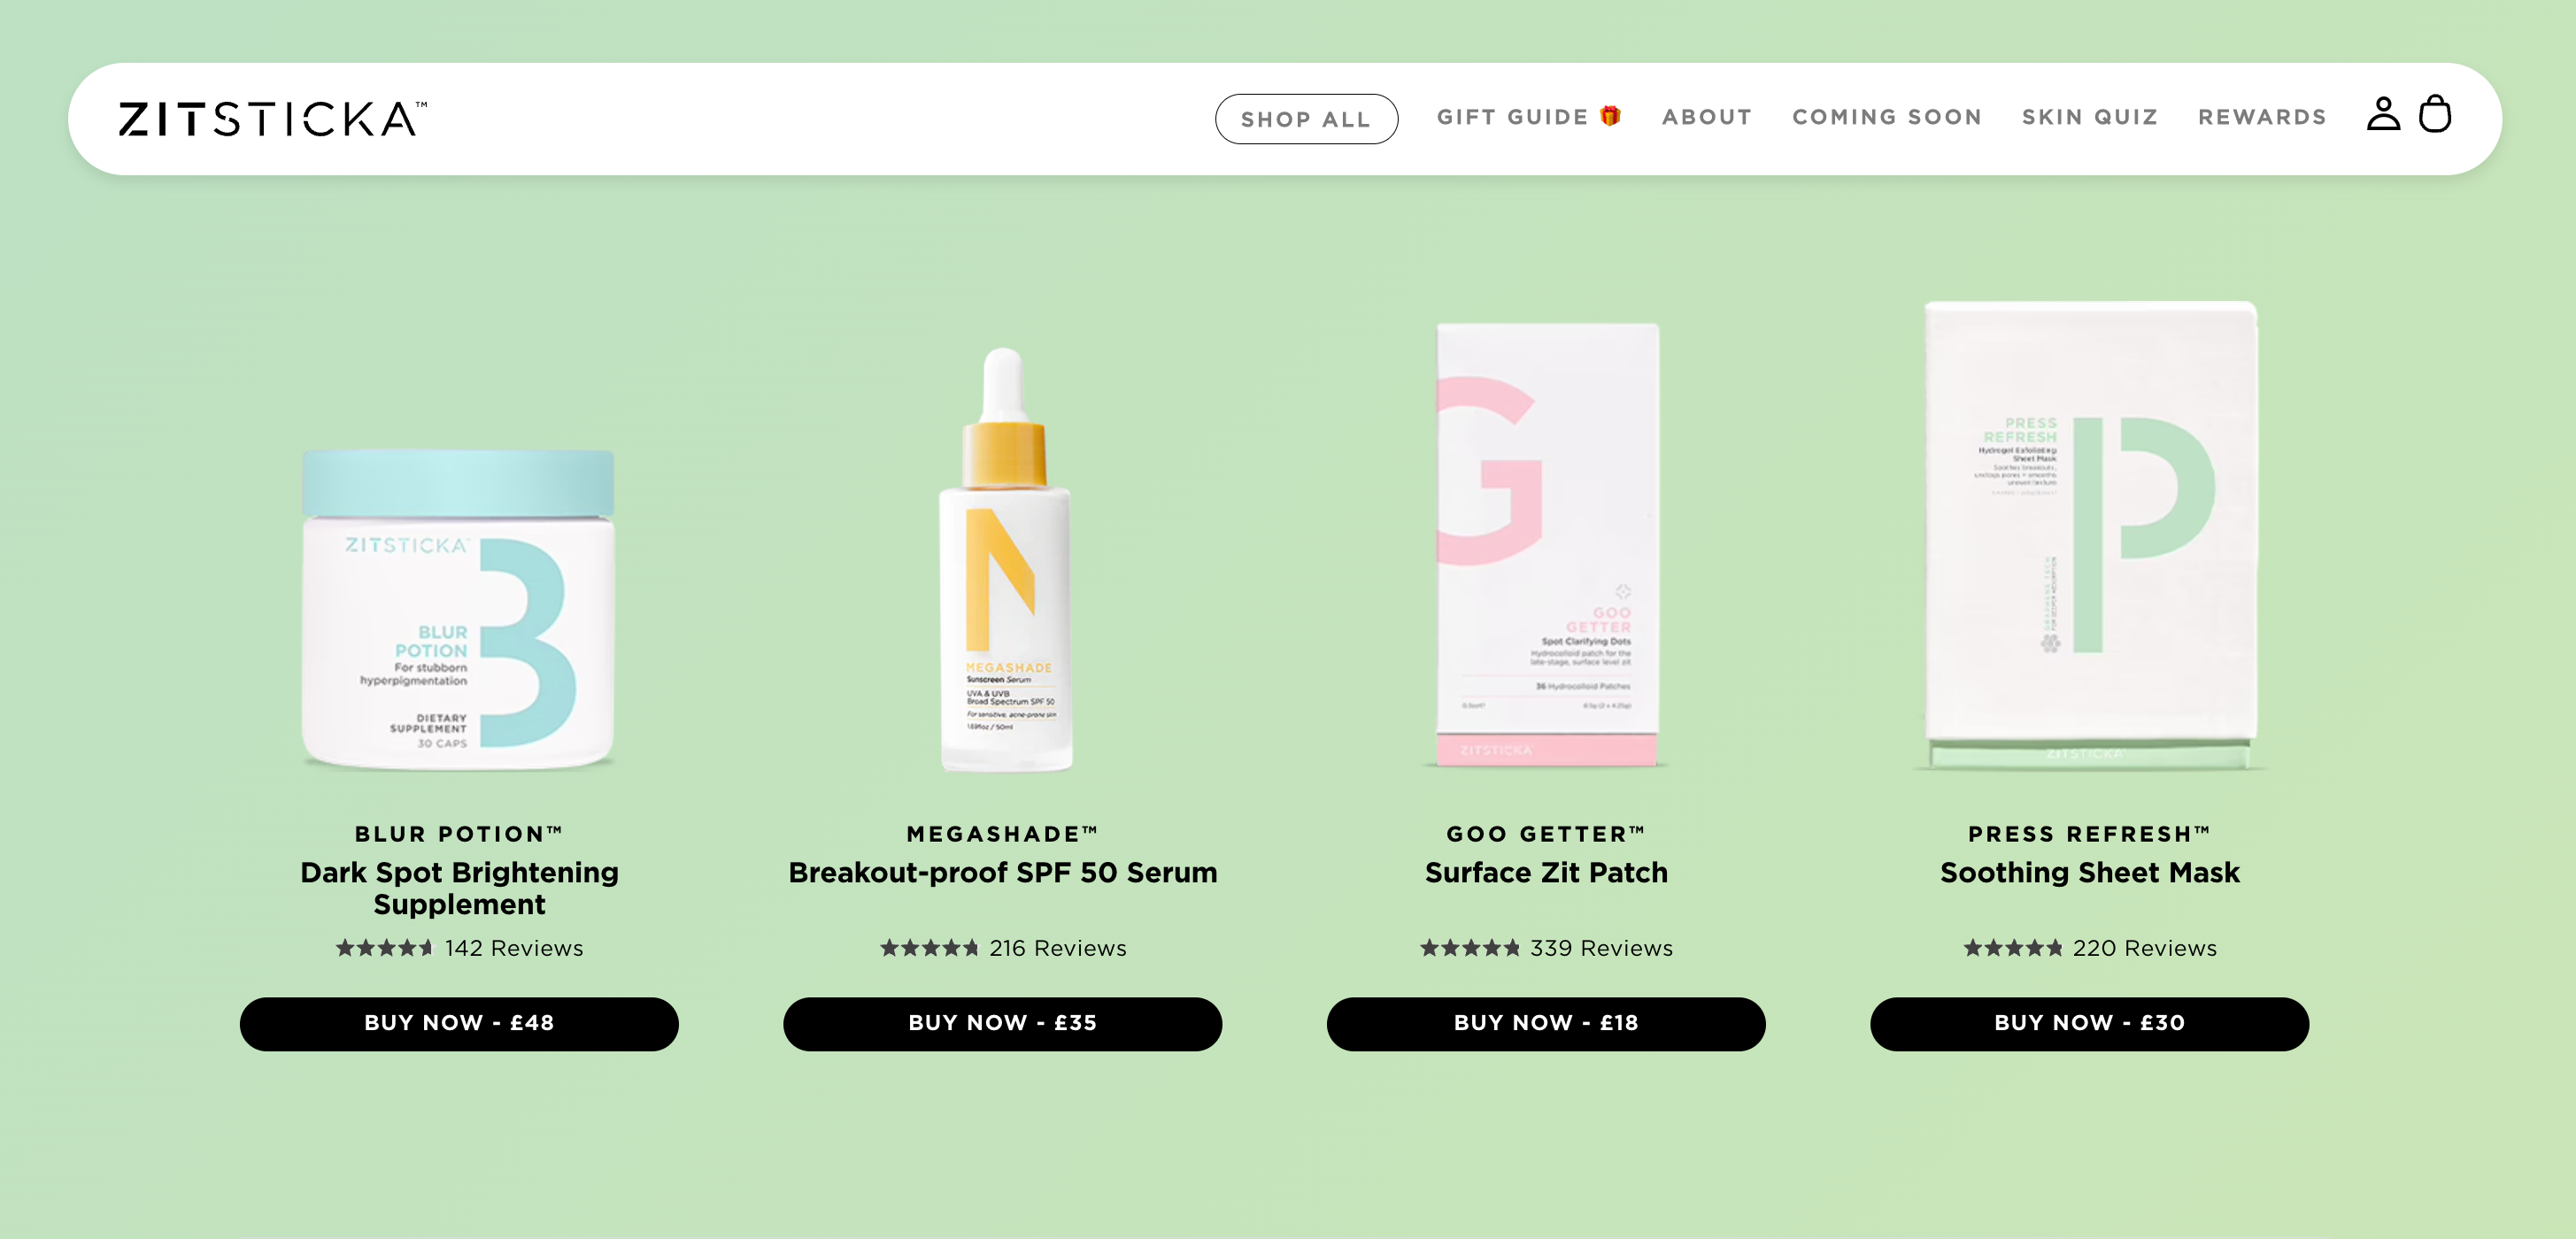 Skin care line Zitsticka's home page features multiple skincare products